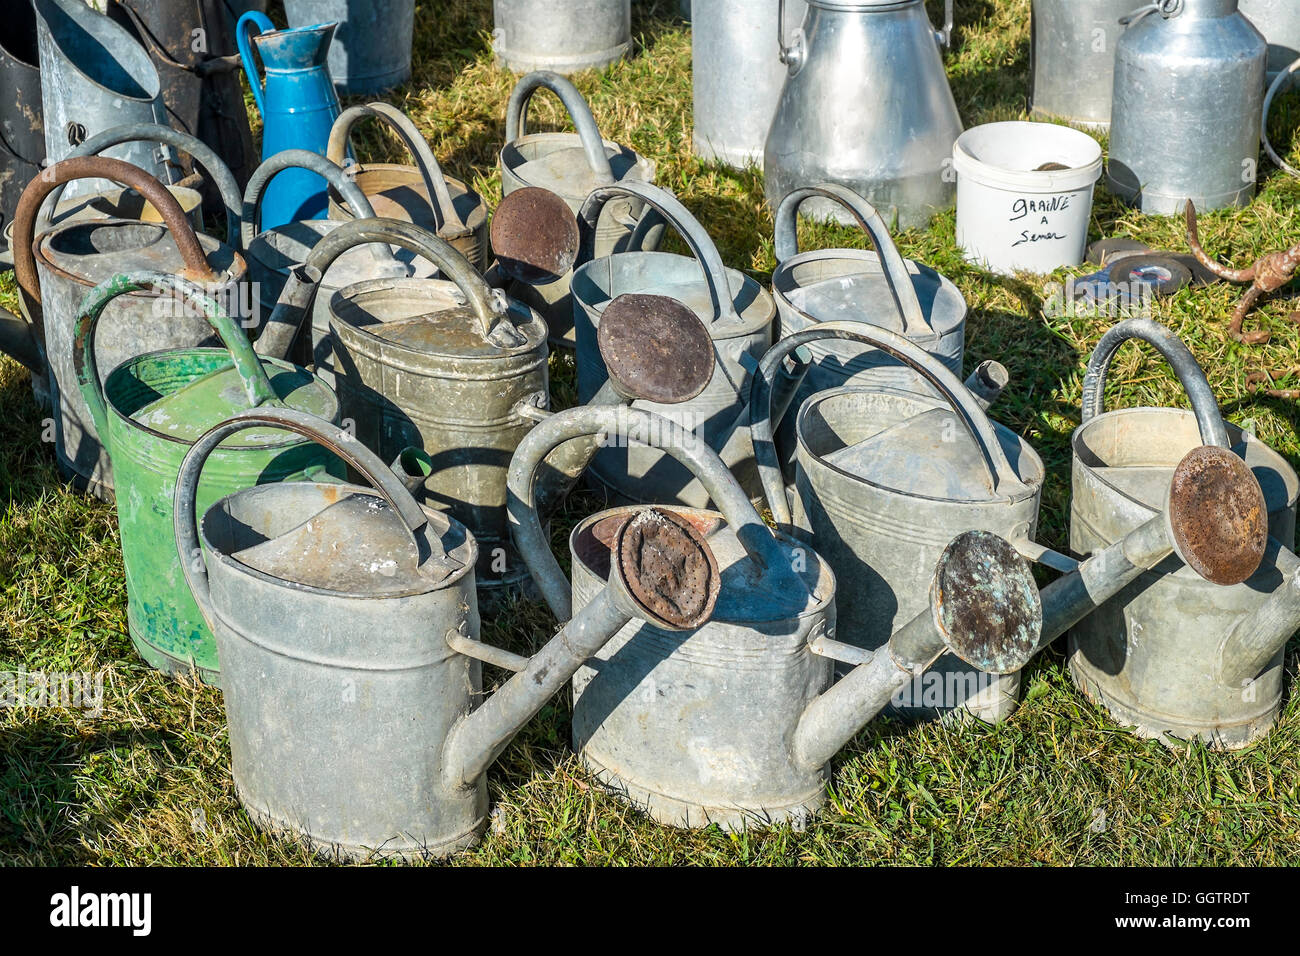 Display of old watering cans and utensils at open-air event - sud-Touraine, France. Stock Photo